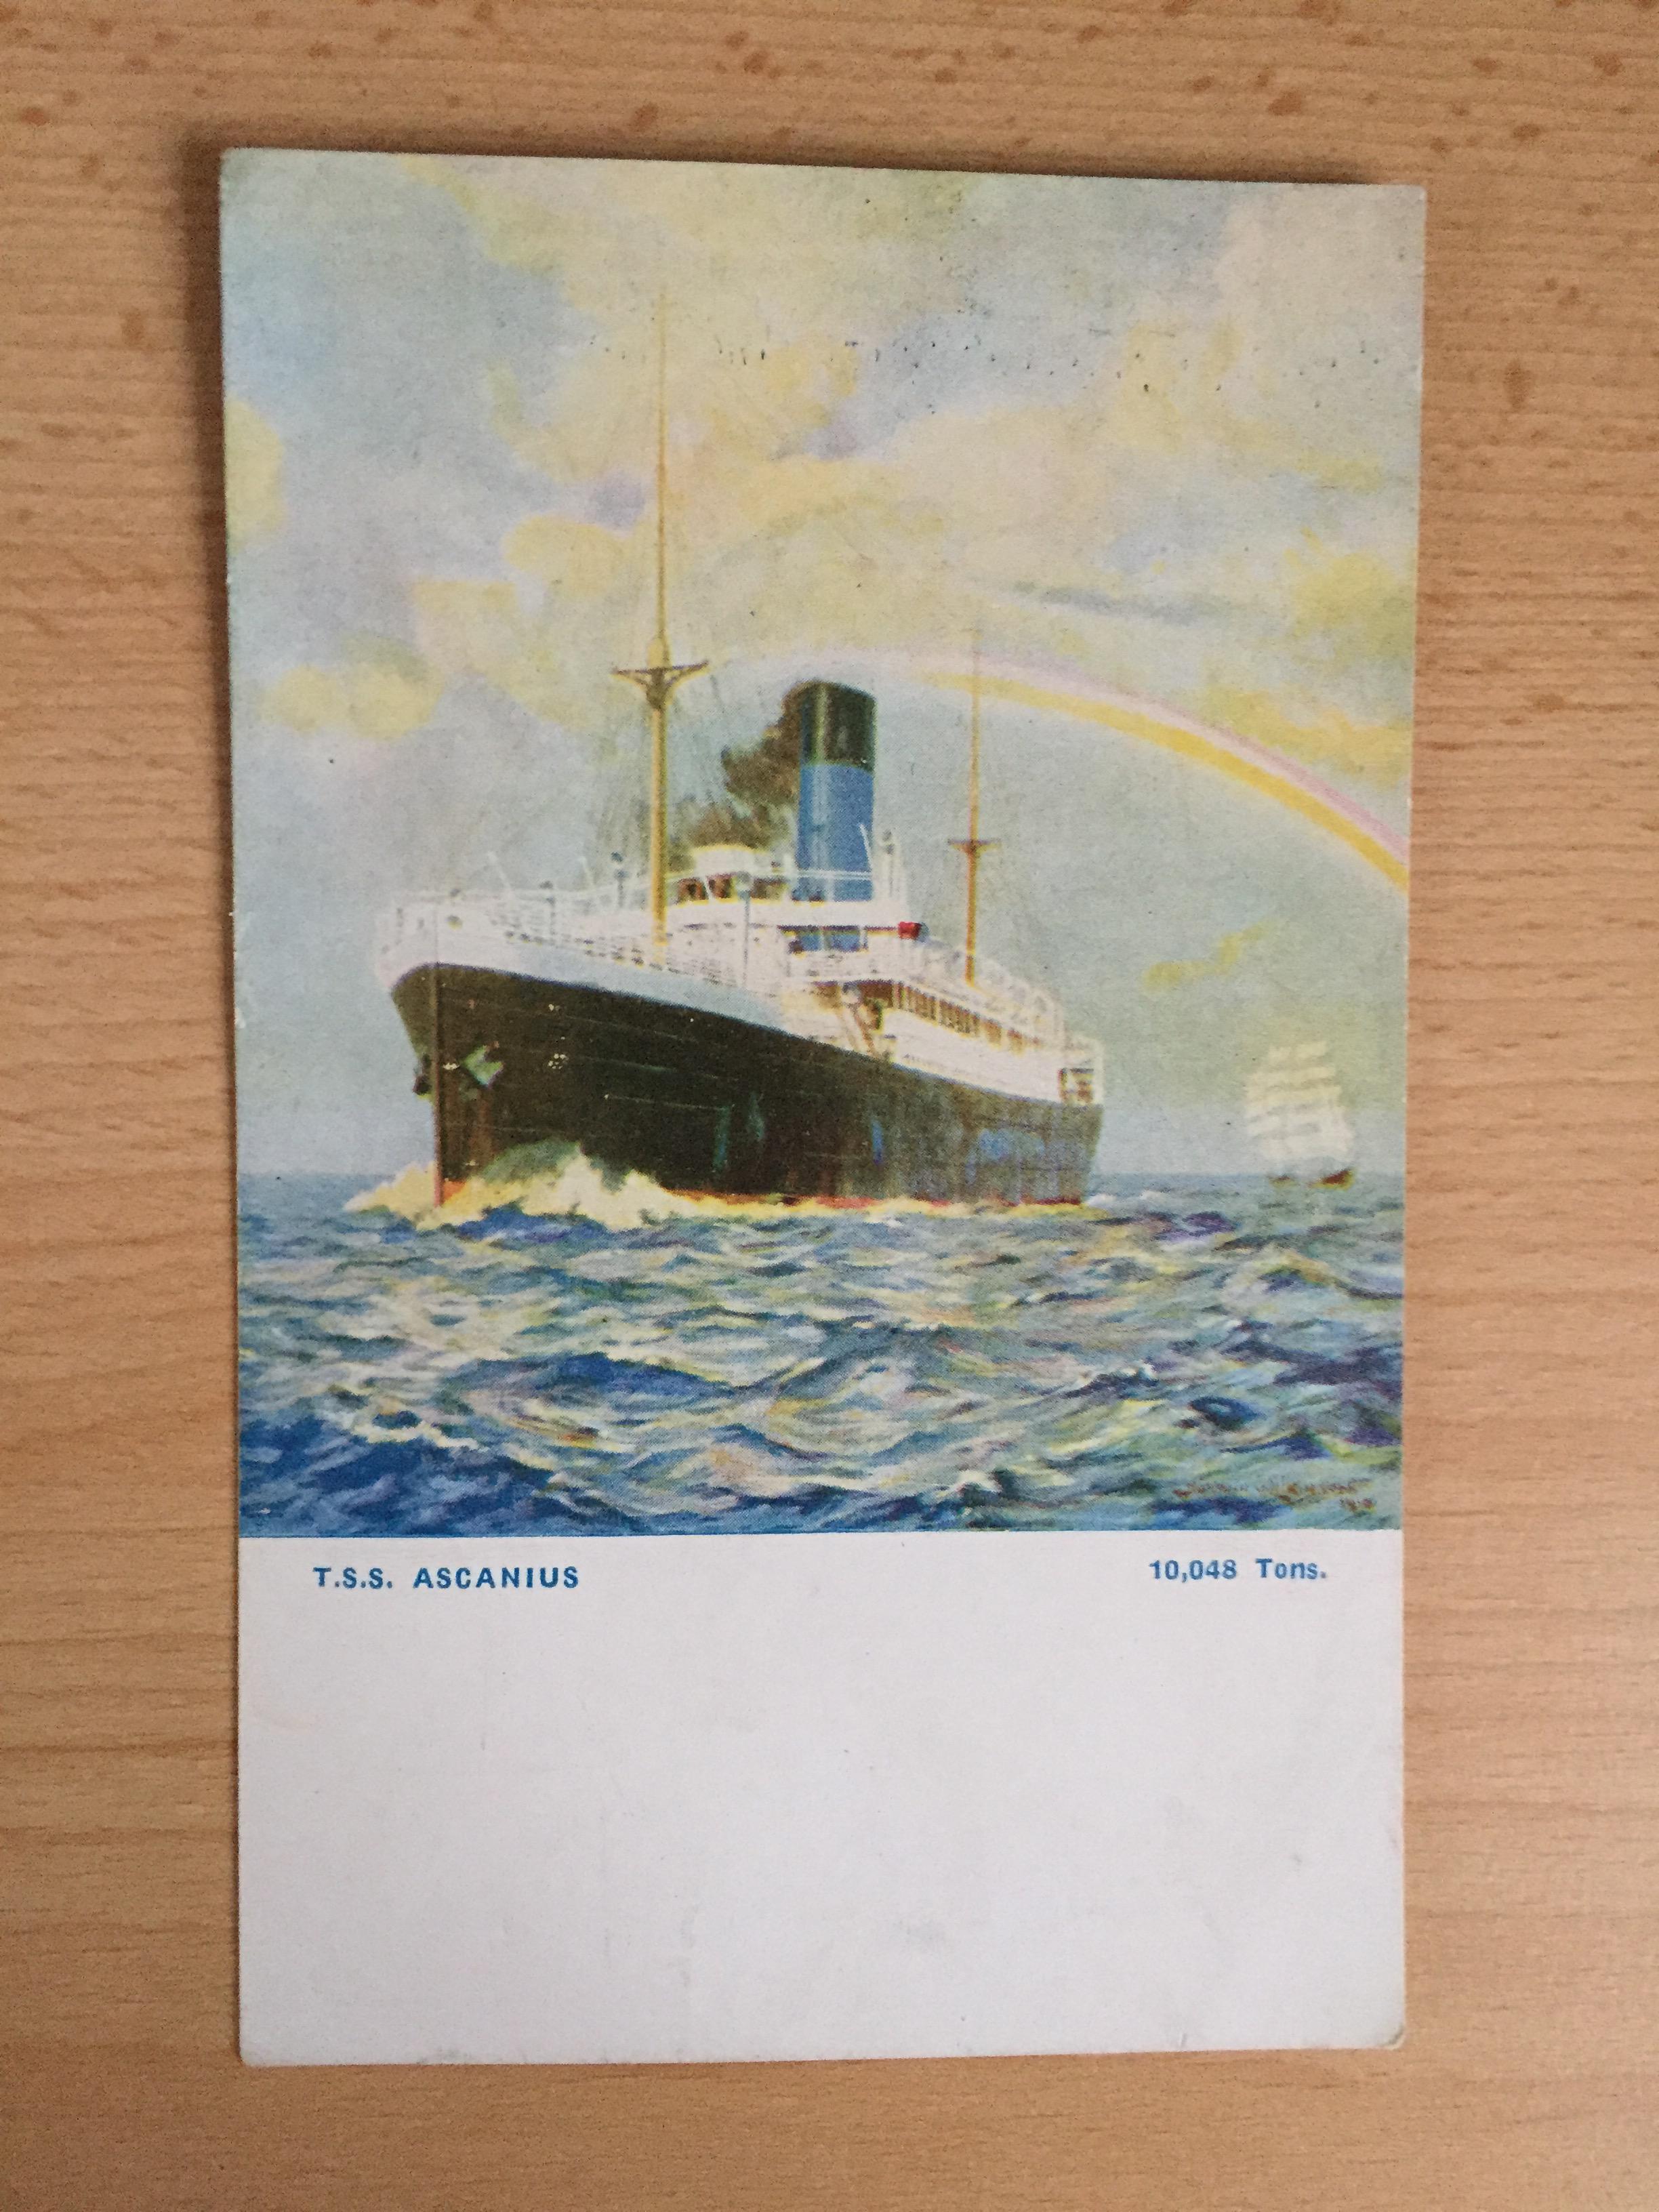 EARLY COLOUR POSTCARD FROM THE BLUE FUNNEL LINE VESSEL THE SS ASCANIUS